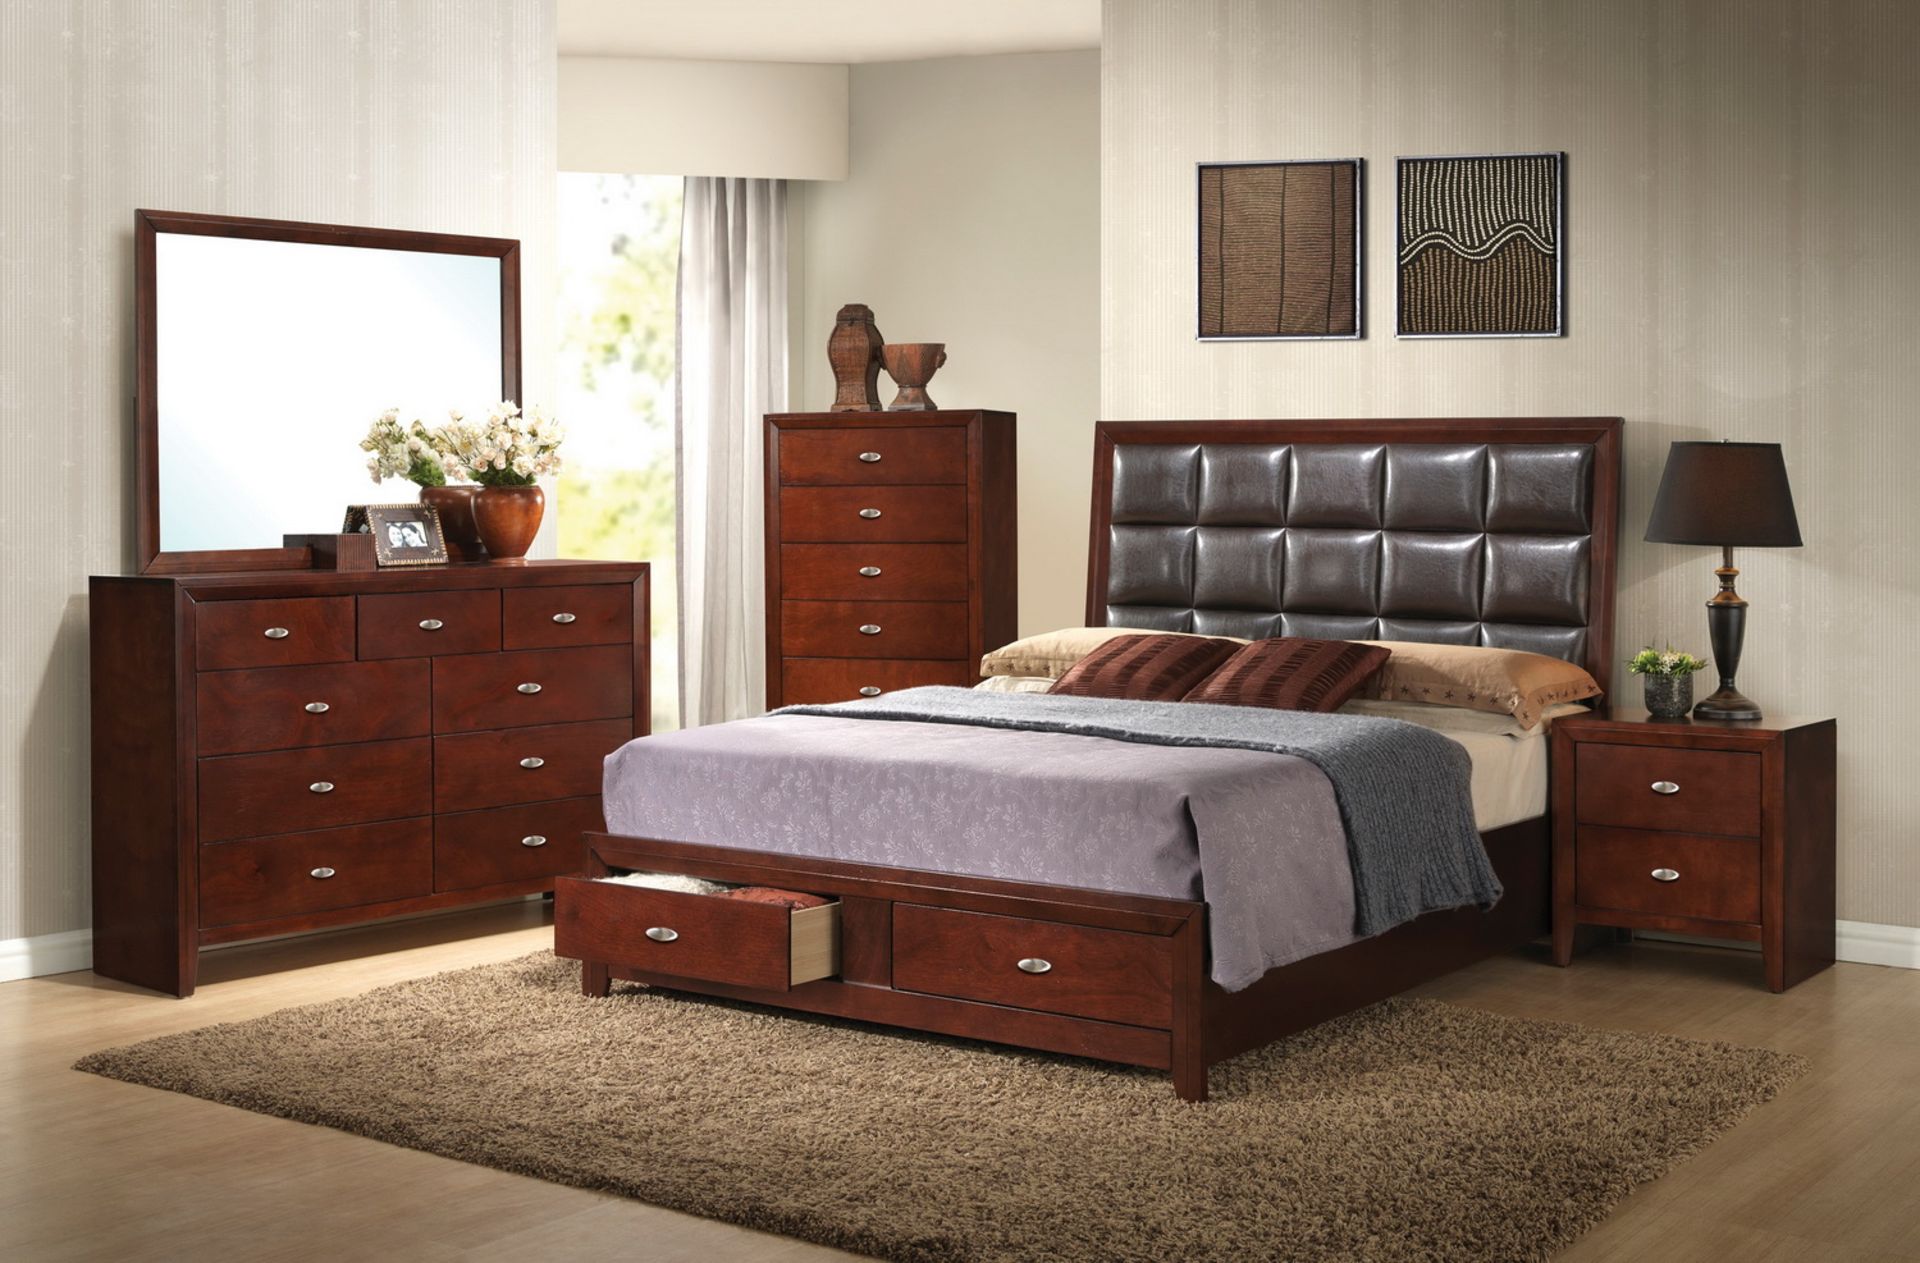 UNITS - (LK-BR355BC) BROWN CHERRY BEDROOM CHEST (NEW IN BOX) & (1) NIGHT STAND TOTAL)